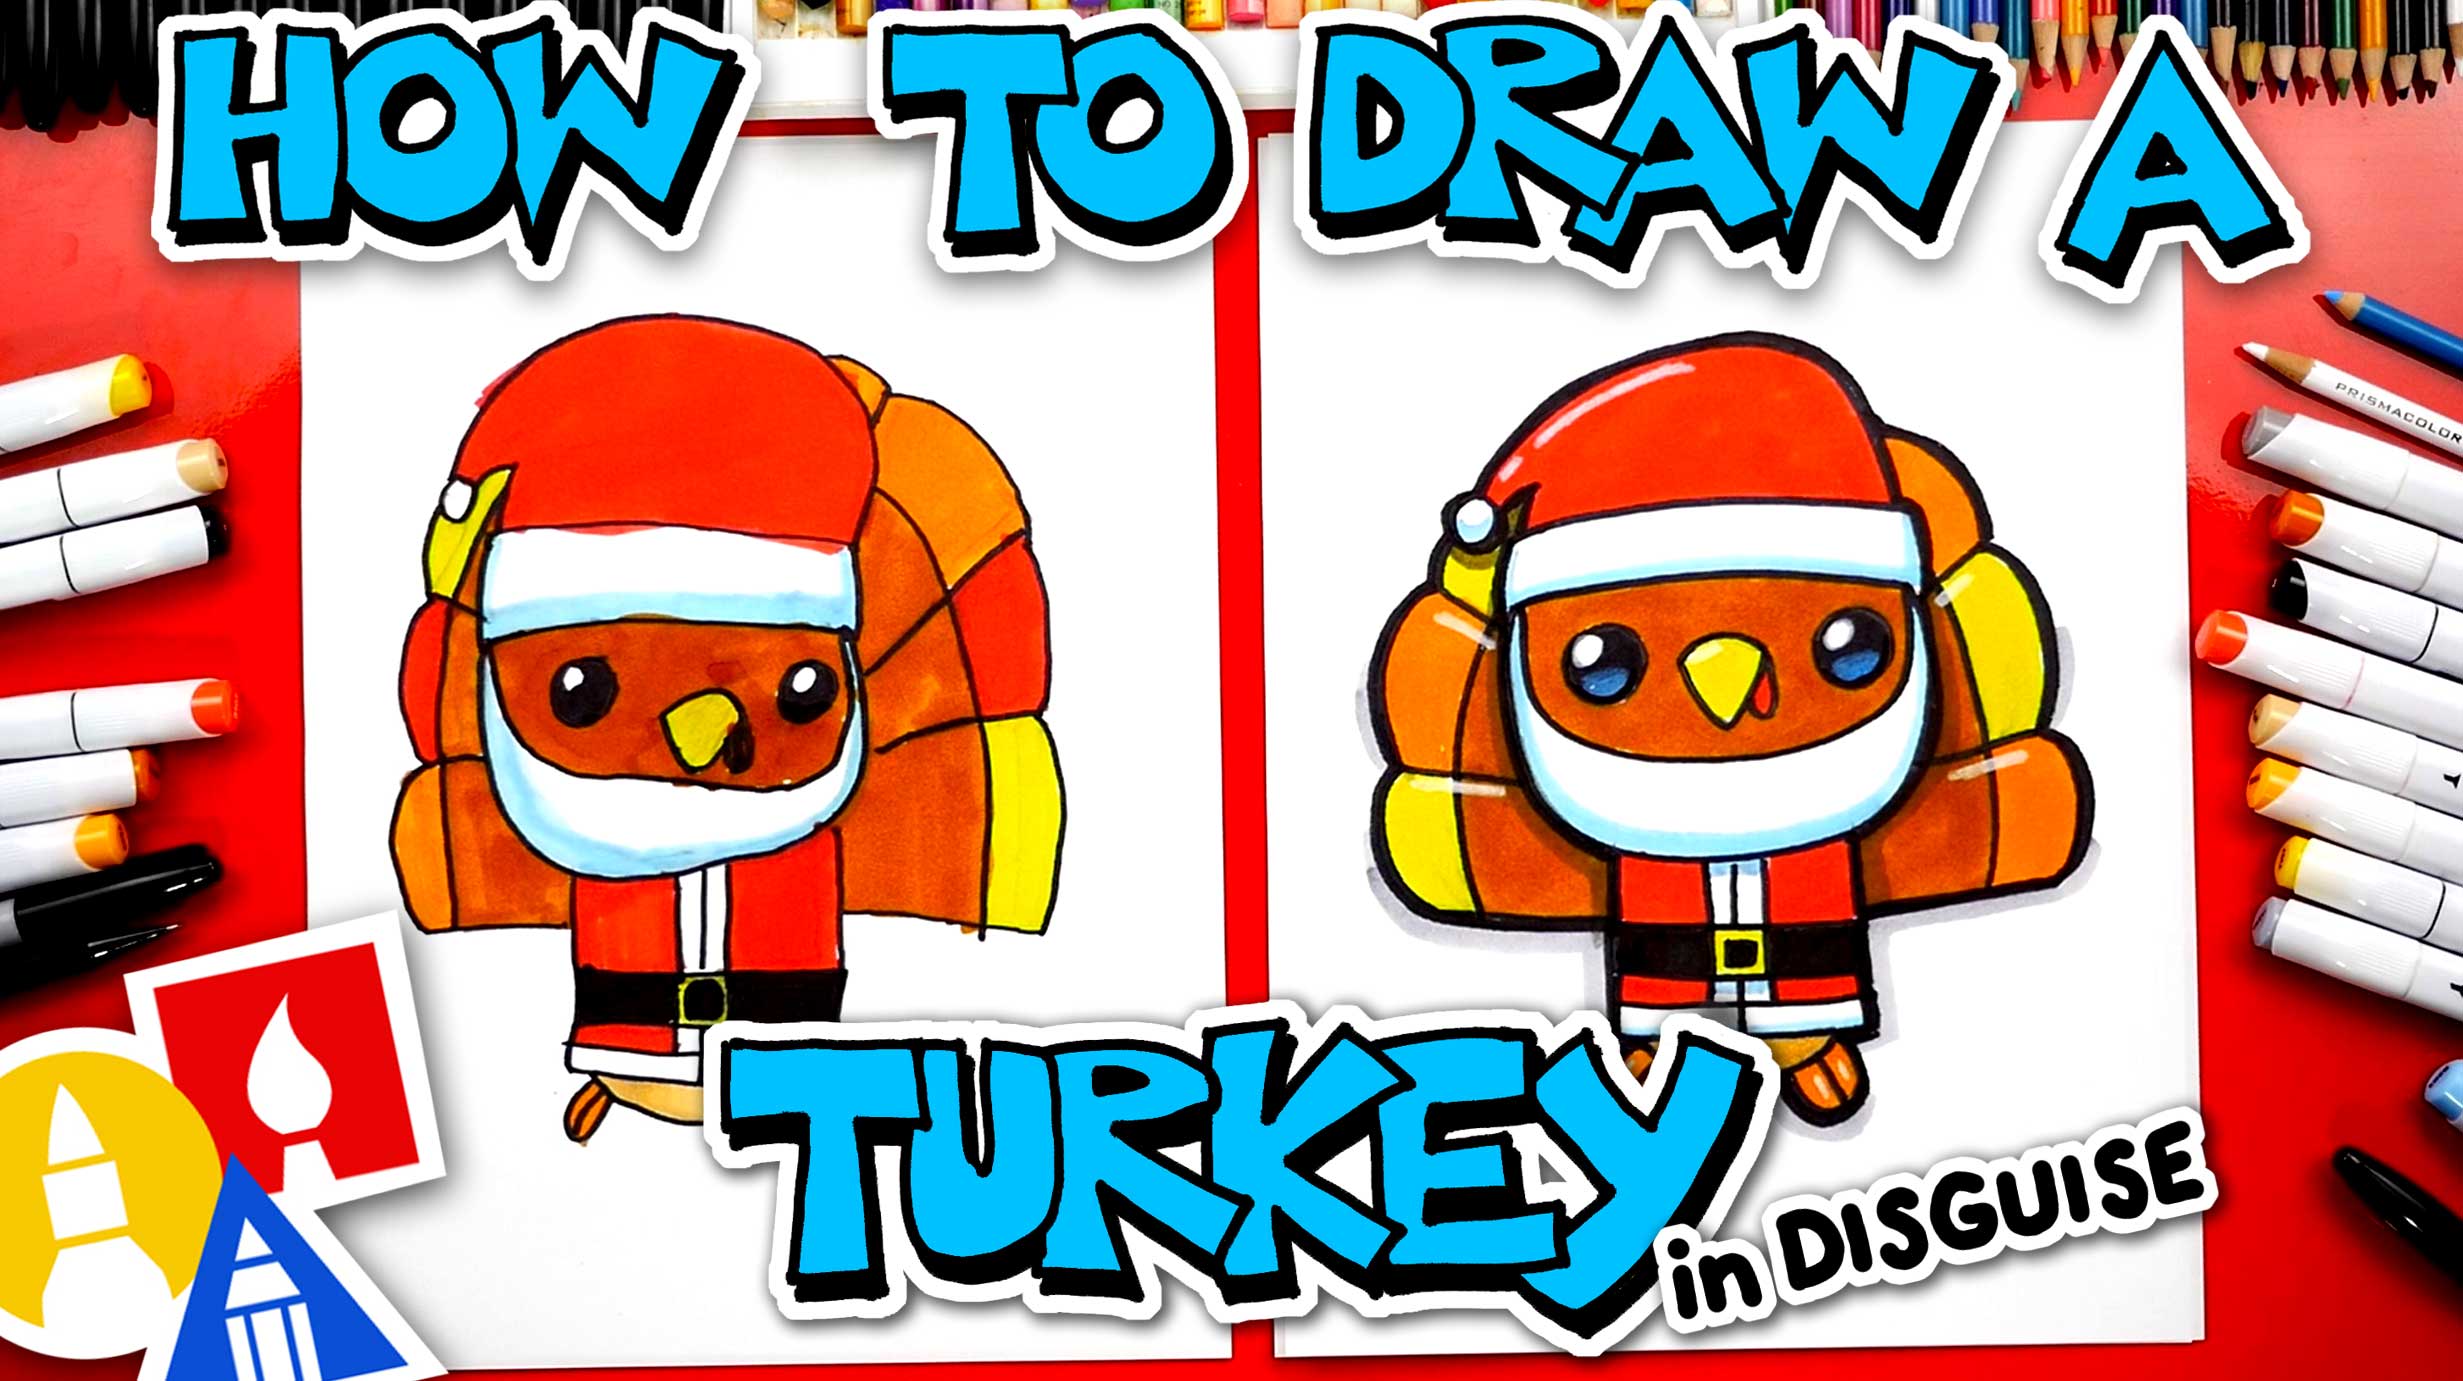 How To Draw A Funny Cartoon Turkey In Disguise - Art For Kids Hub -